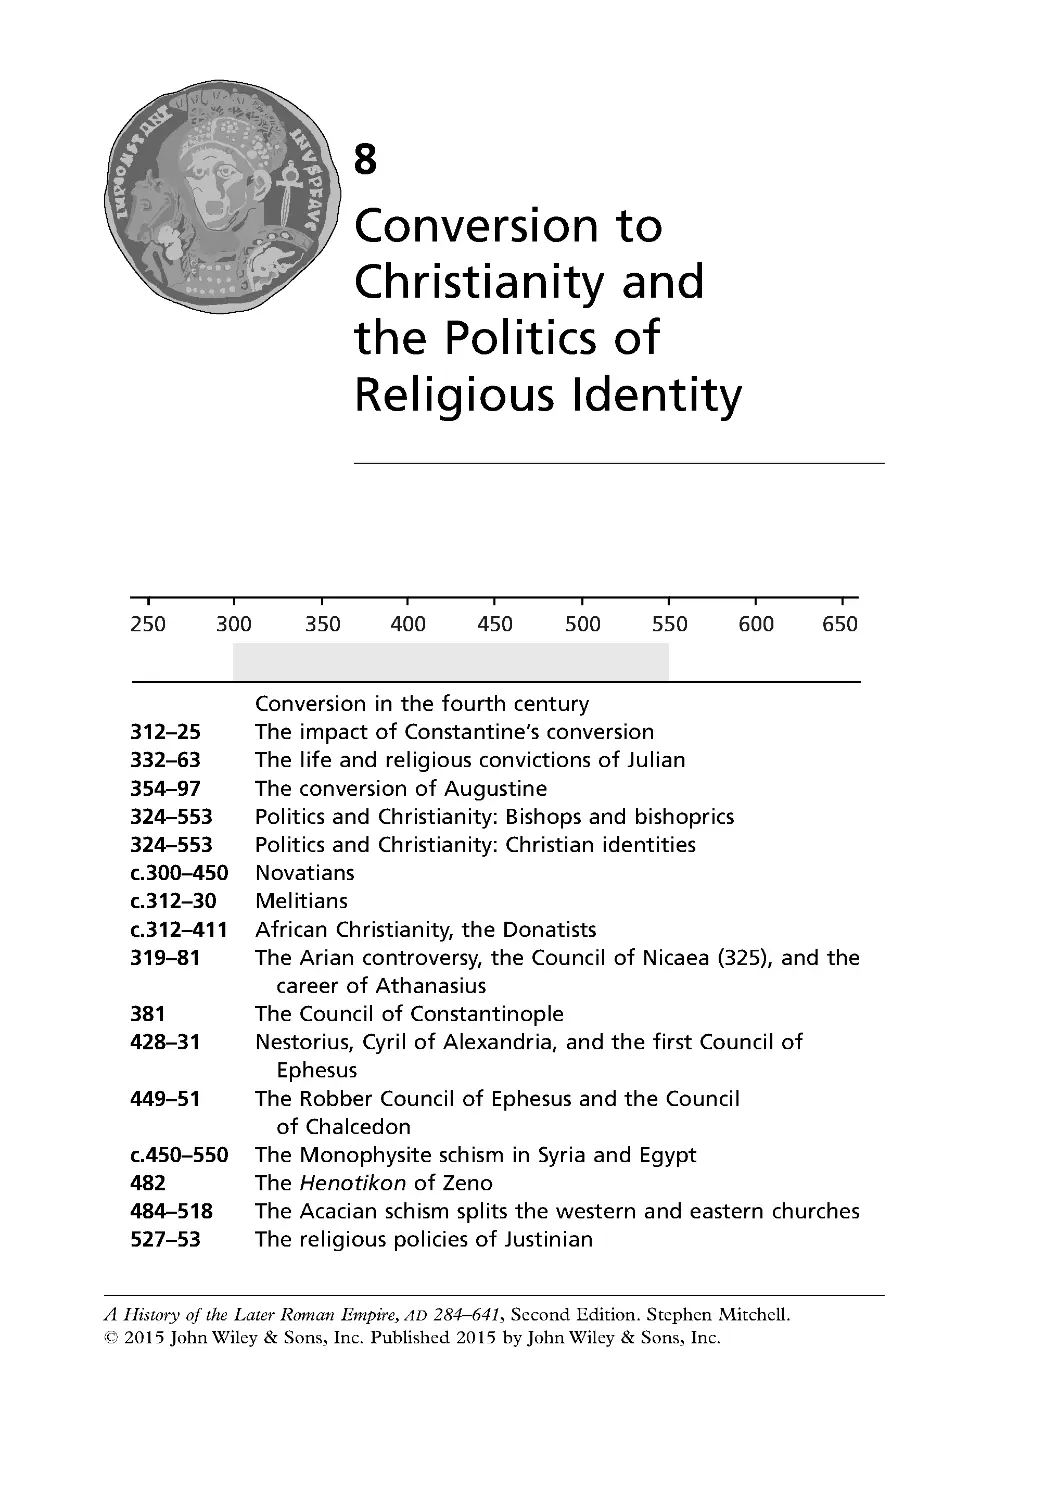 8: Conversion to Christianity and the Politics of Religious Identity